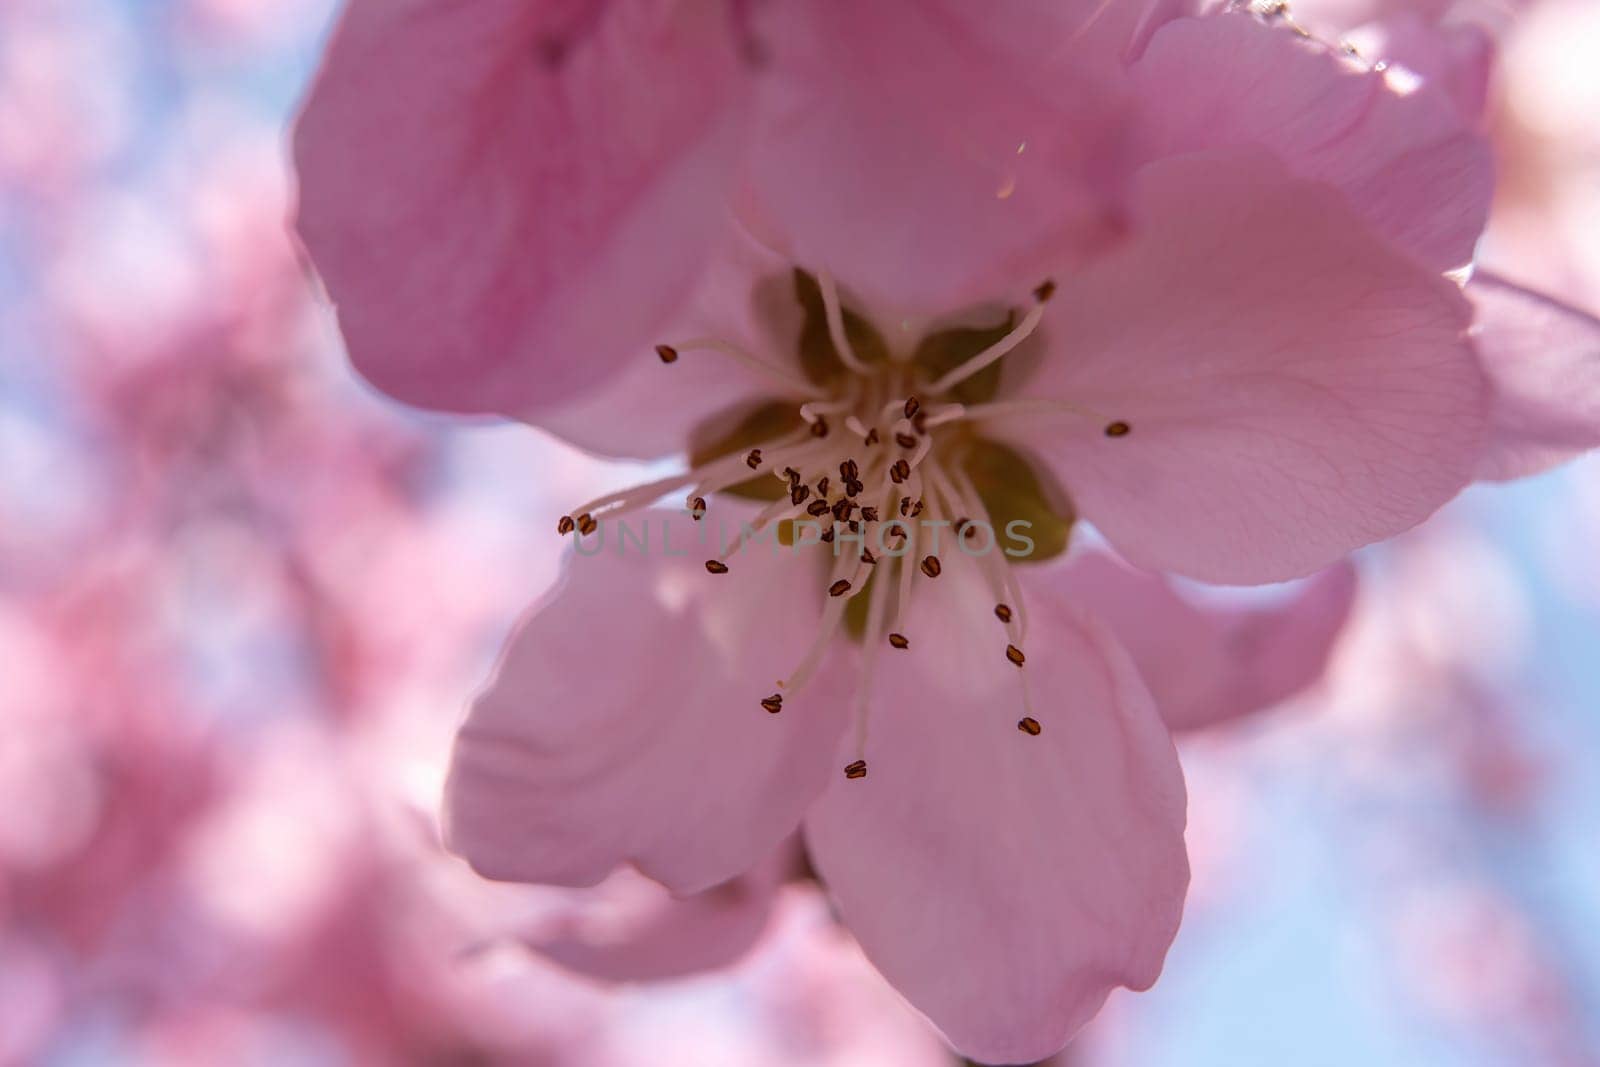 close up pink peach flower against a blue sky. The flower is the main focus of the image, and it is in full bloom